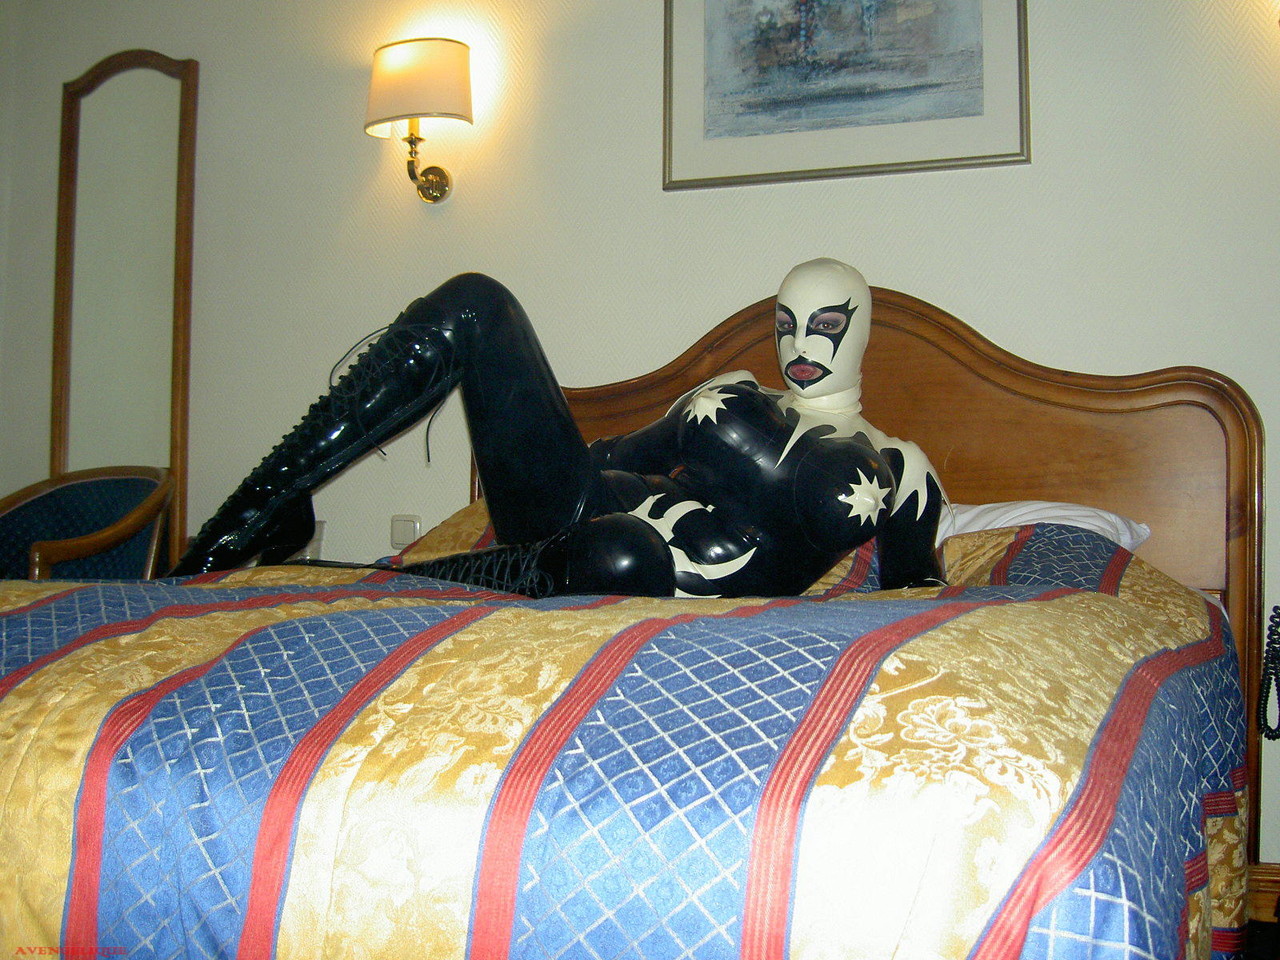 Fetish model Darkwing Zero poses on a hotel room bed in latex clothing photo porno #426050022 | Rubber Tits Pics, Darkwing Zero, Latex, porno mobile